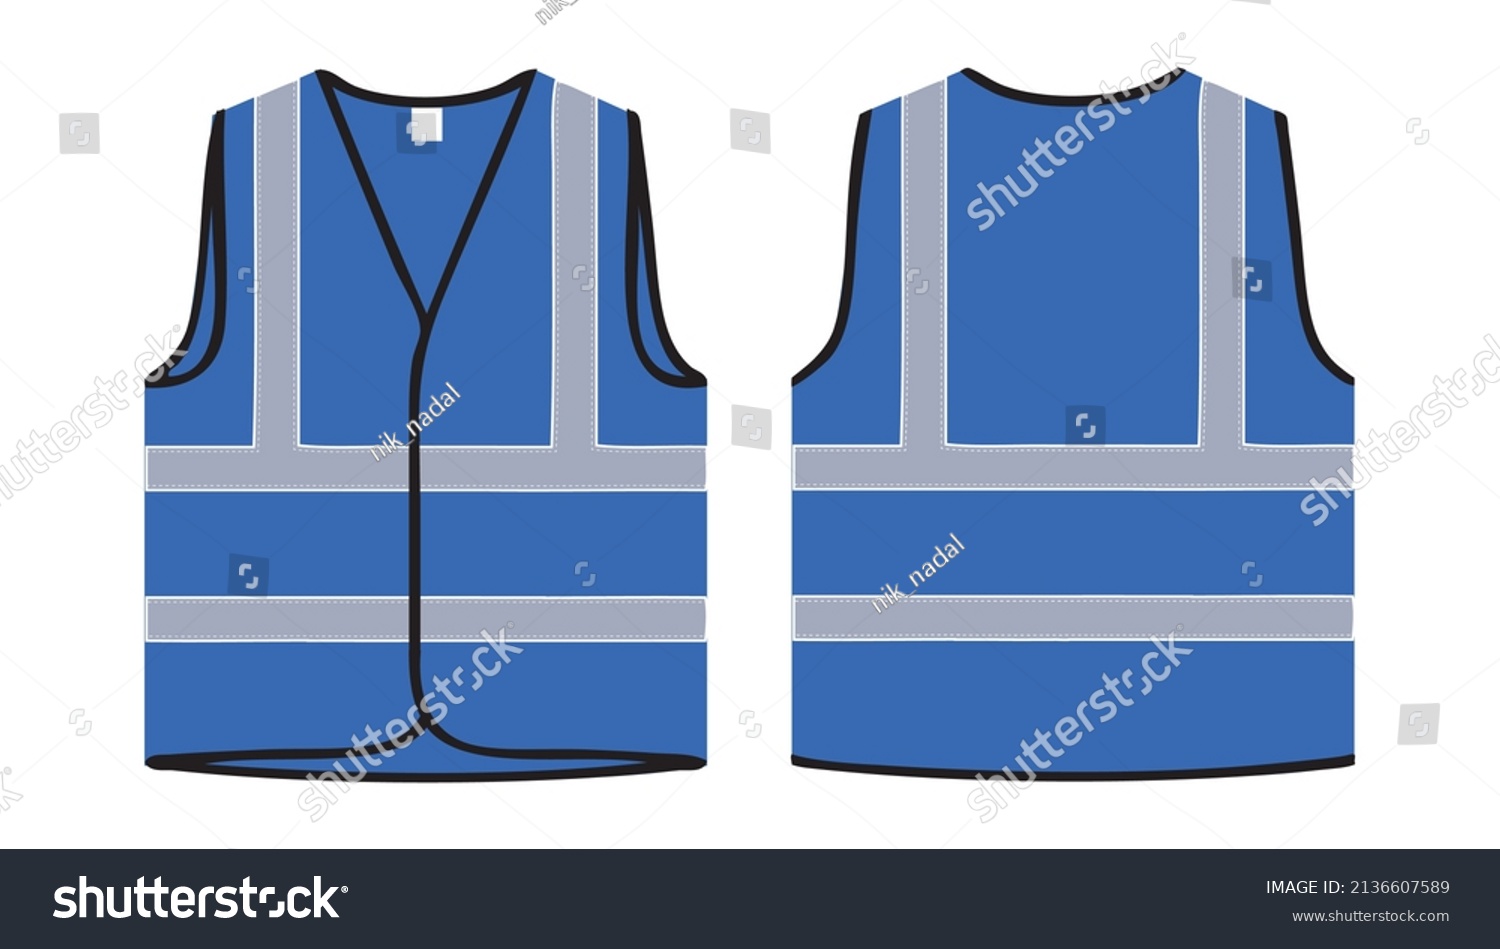 SVG of safety jacket blue in colour or safety vest realistic view vector illustration, reflected jacket isolated svg